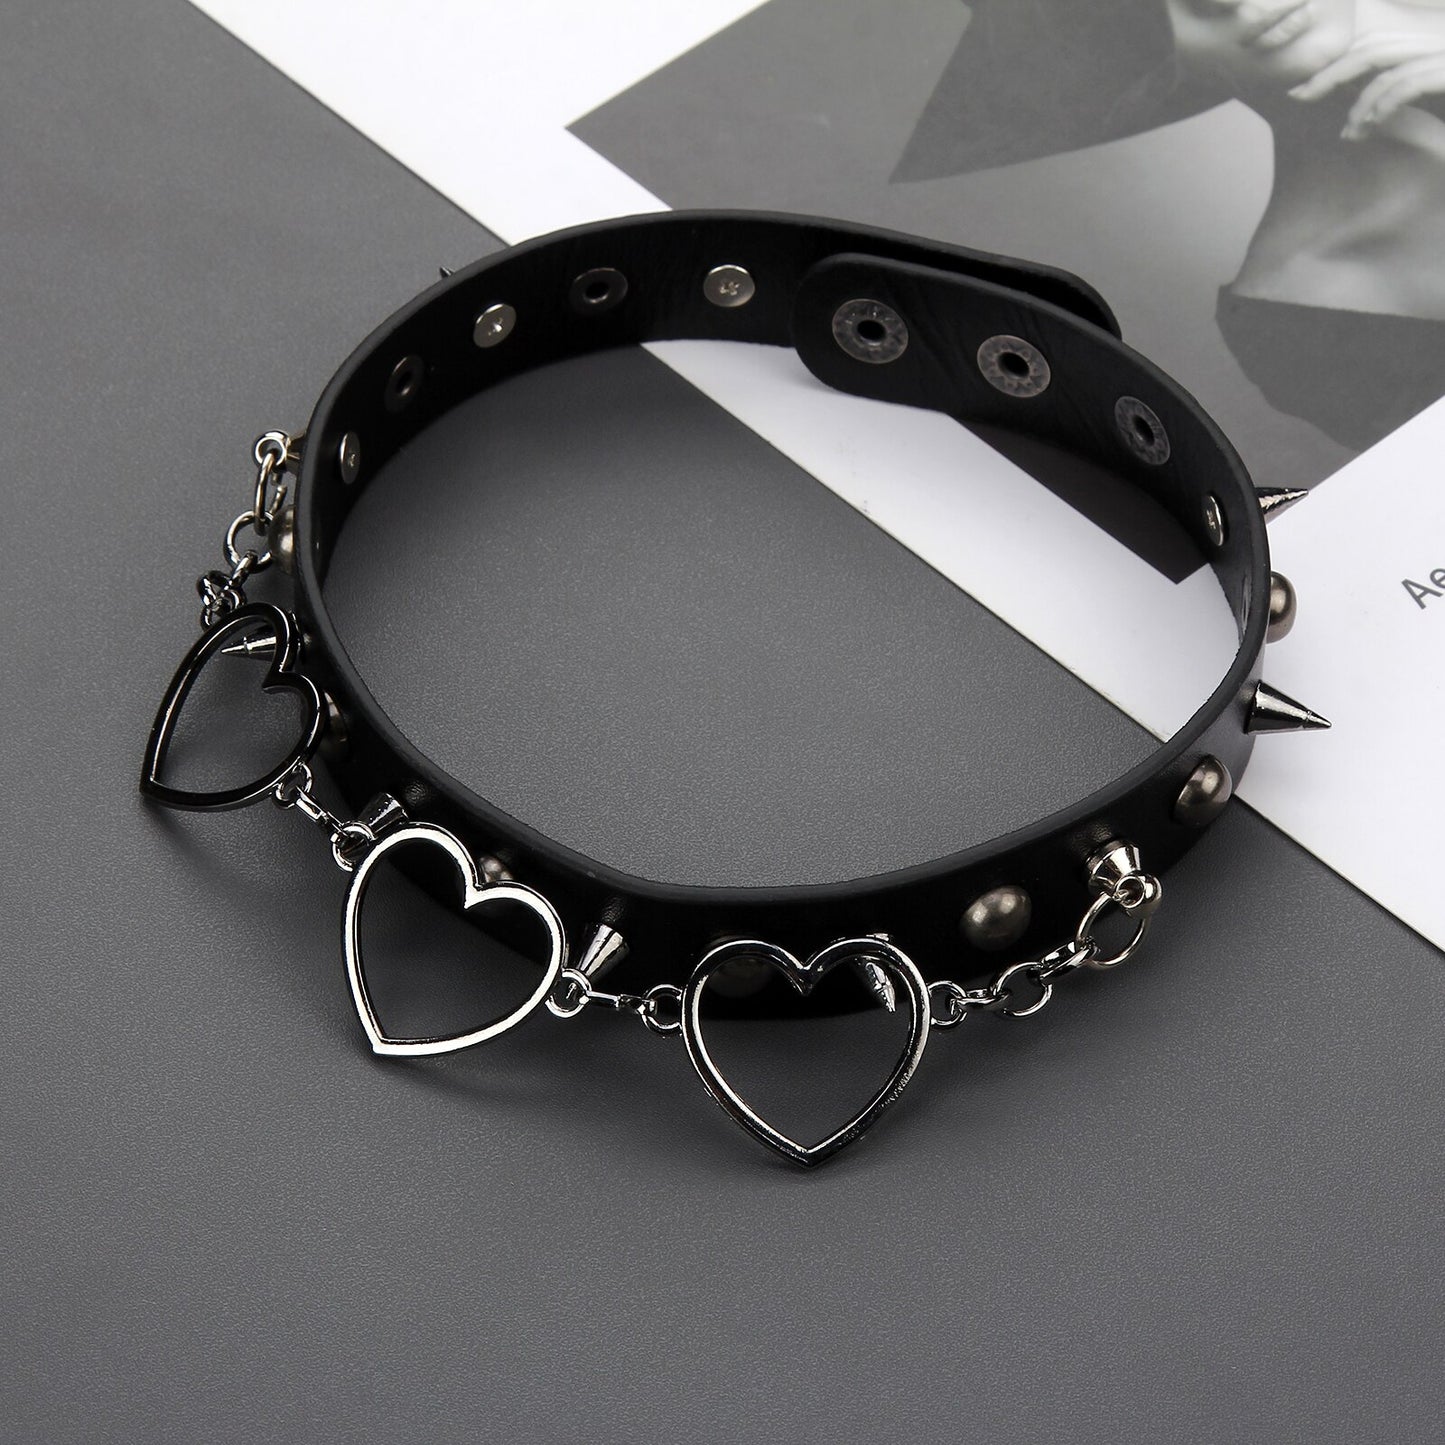 Punk Heart Pendant Leather Choker Collar for Women Girl Studded Punk Silver Color Chain Harajuku Collars Sexy Jewelry